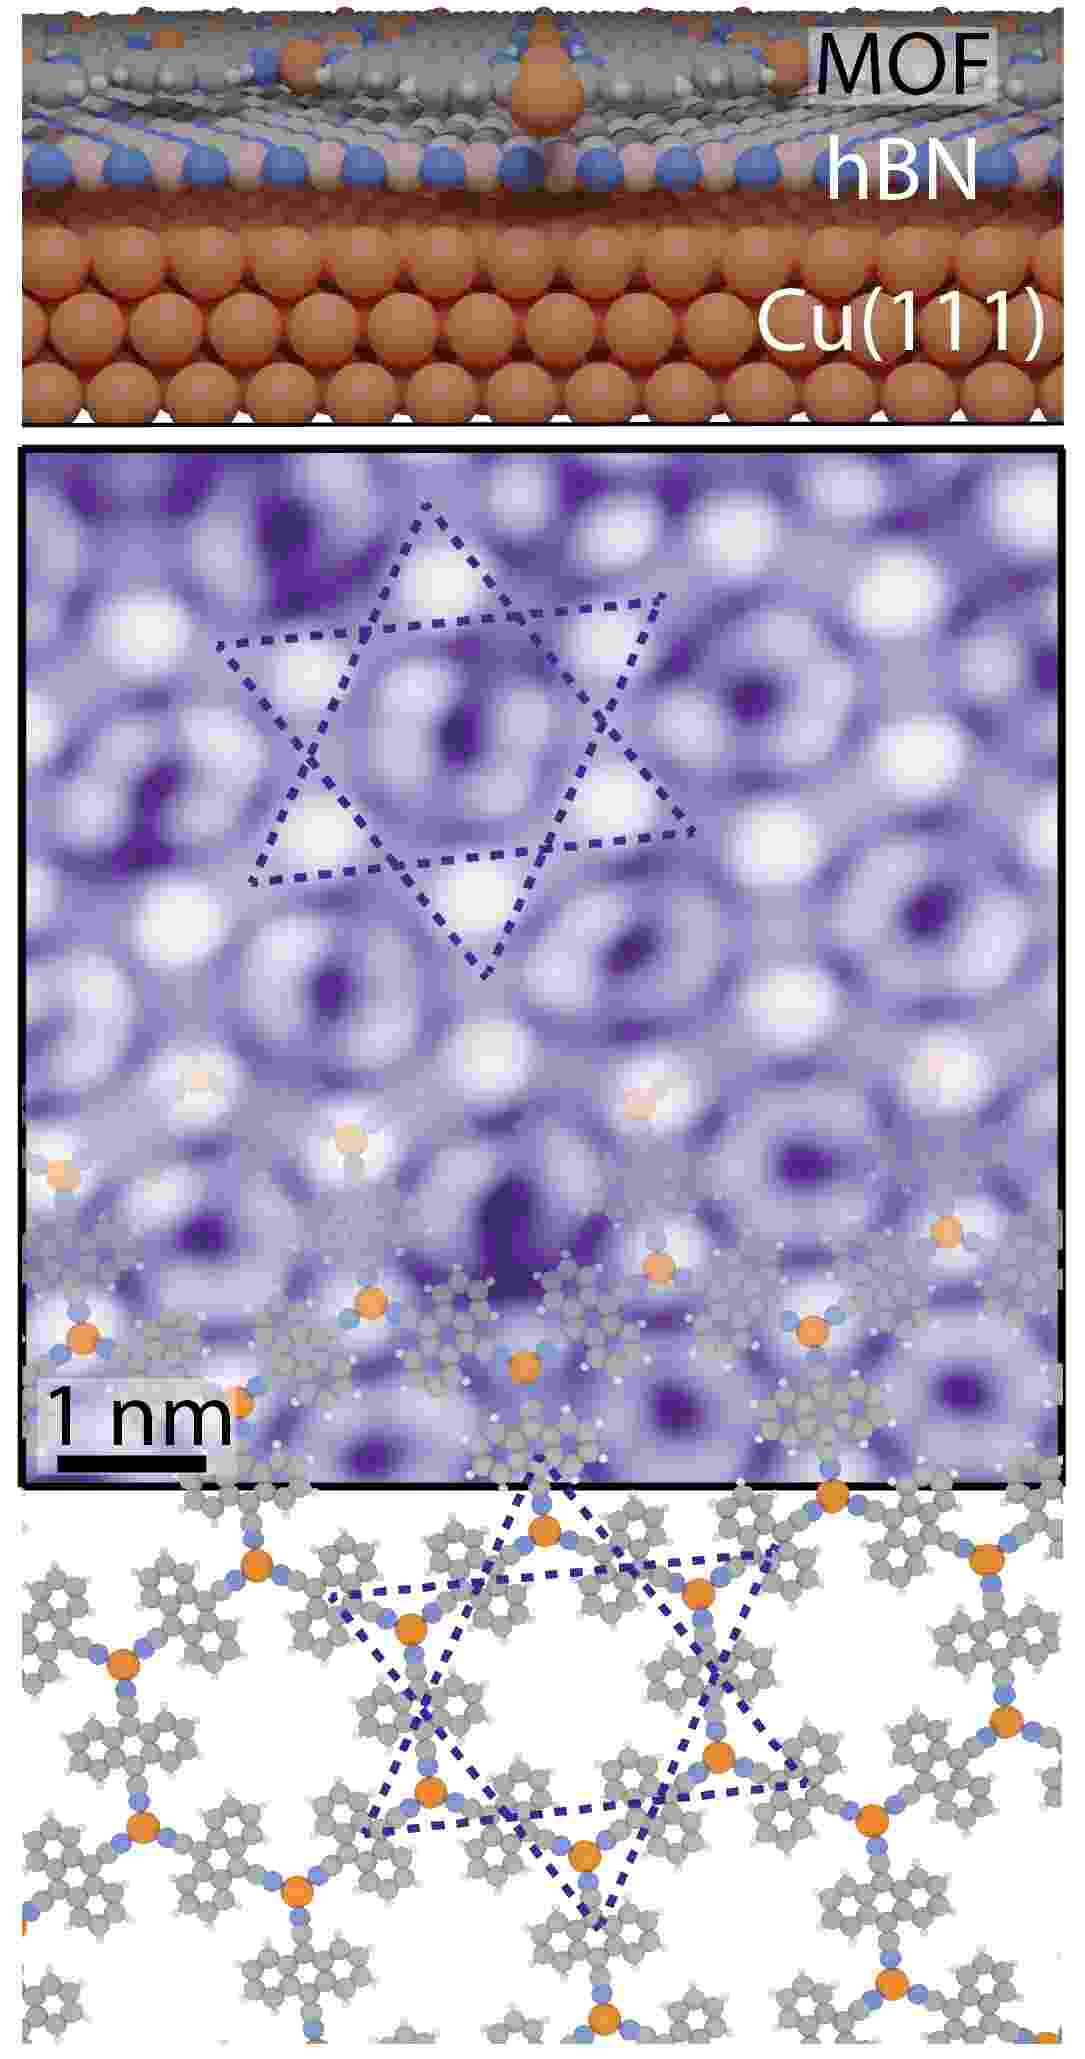 The metal-organic-framework (MOF) material used in the study reveals a star-like (kagome) structure under scanning tunnelling microscope (STM) imaging.